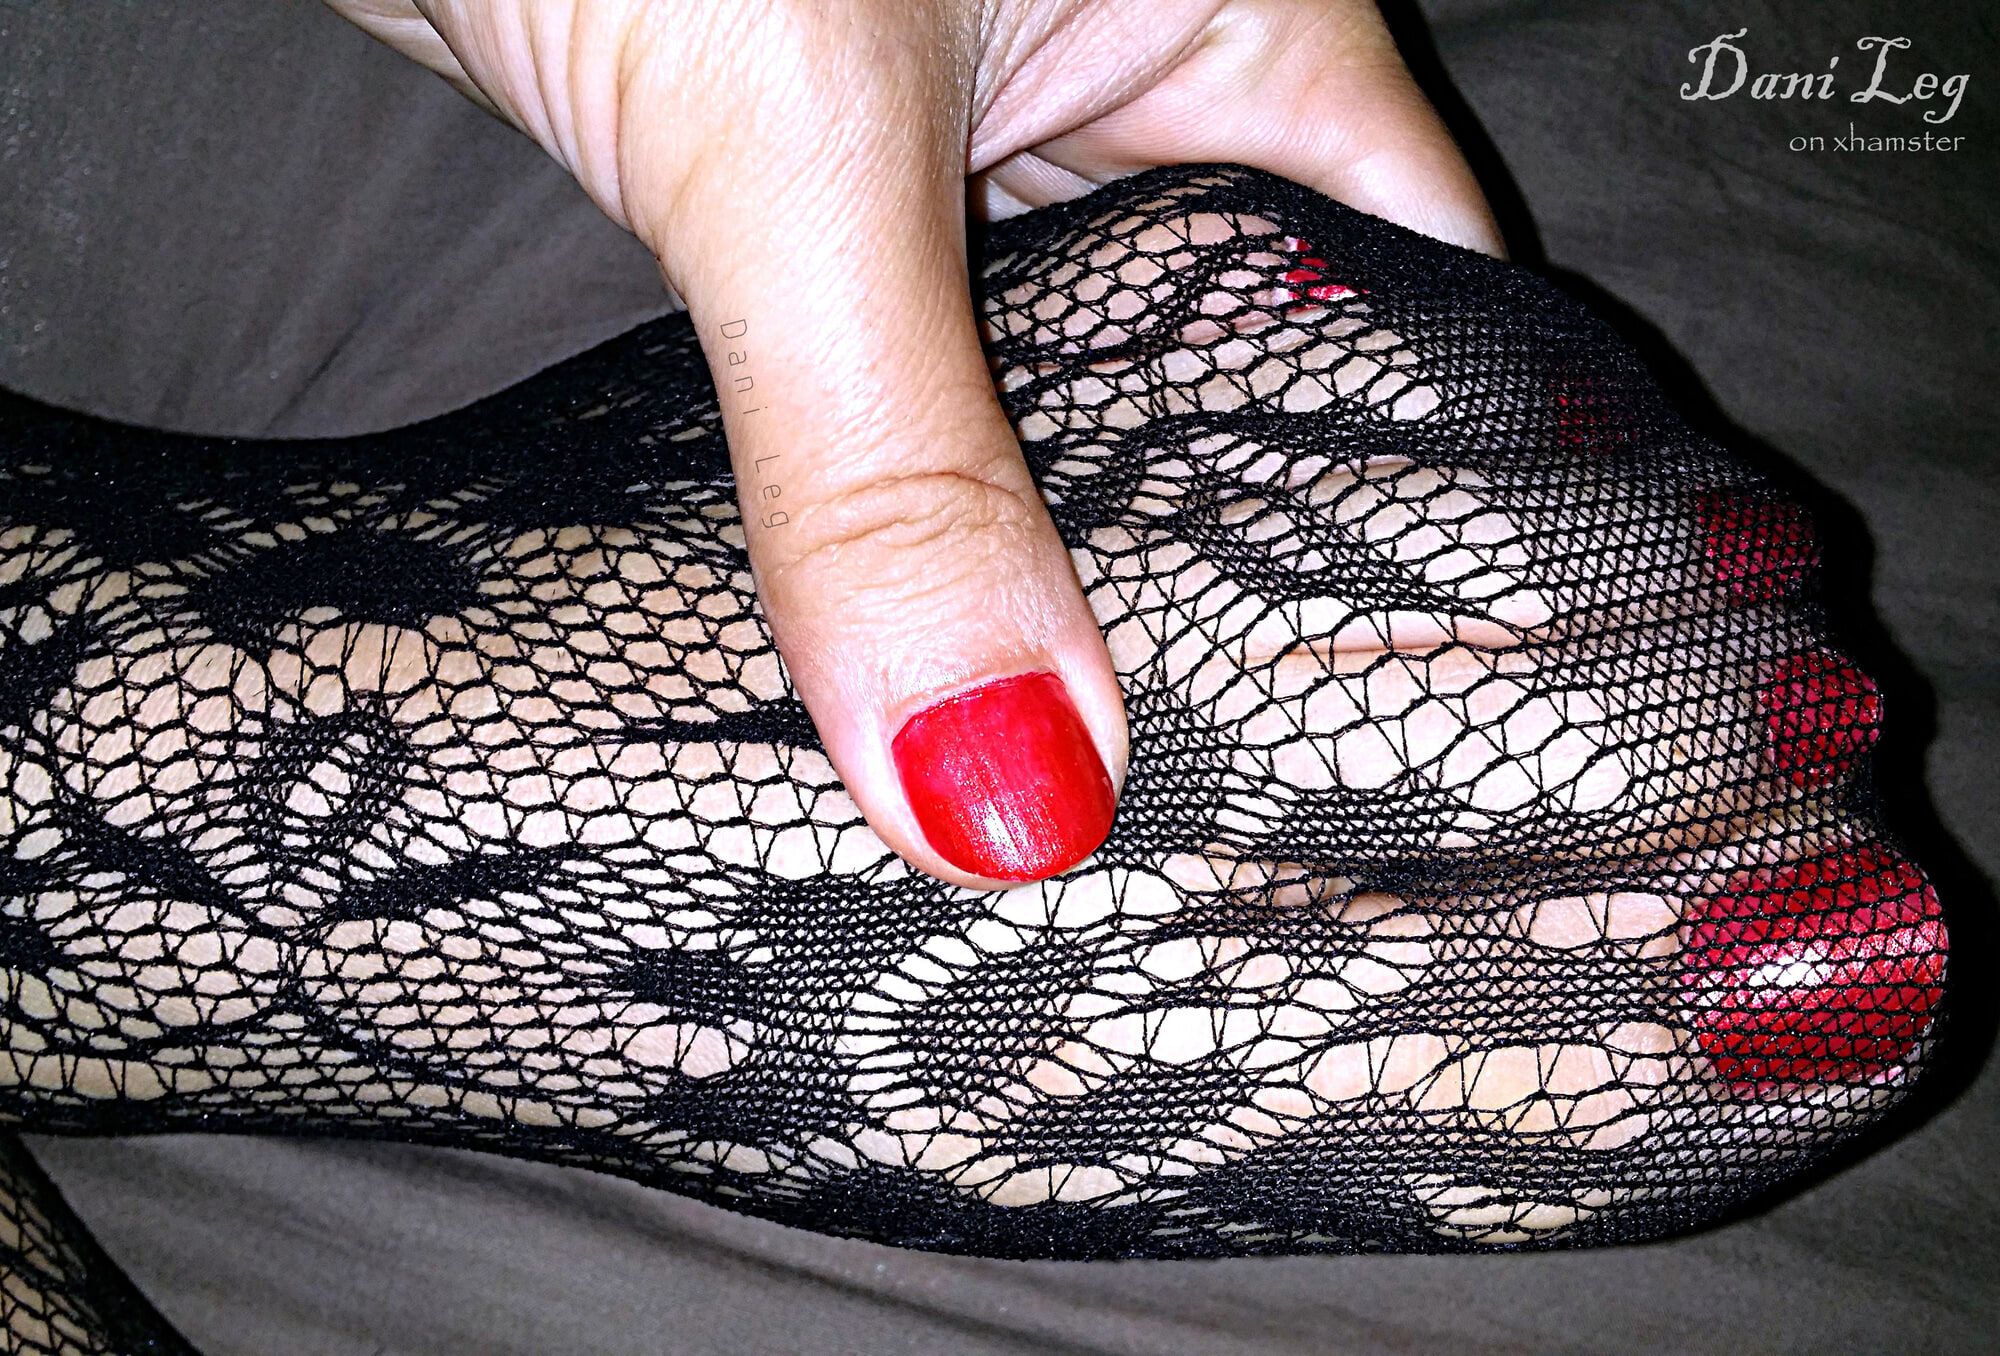 018P Pretty Hands and Patterned Pantyhose #3